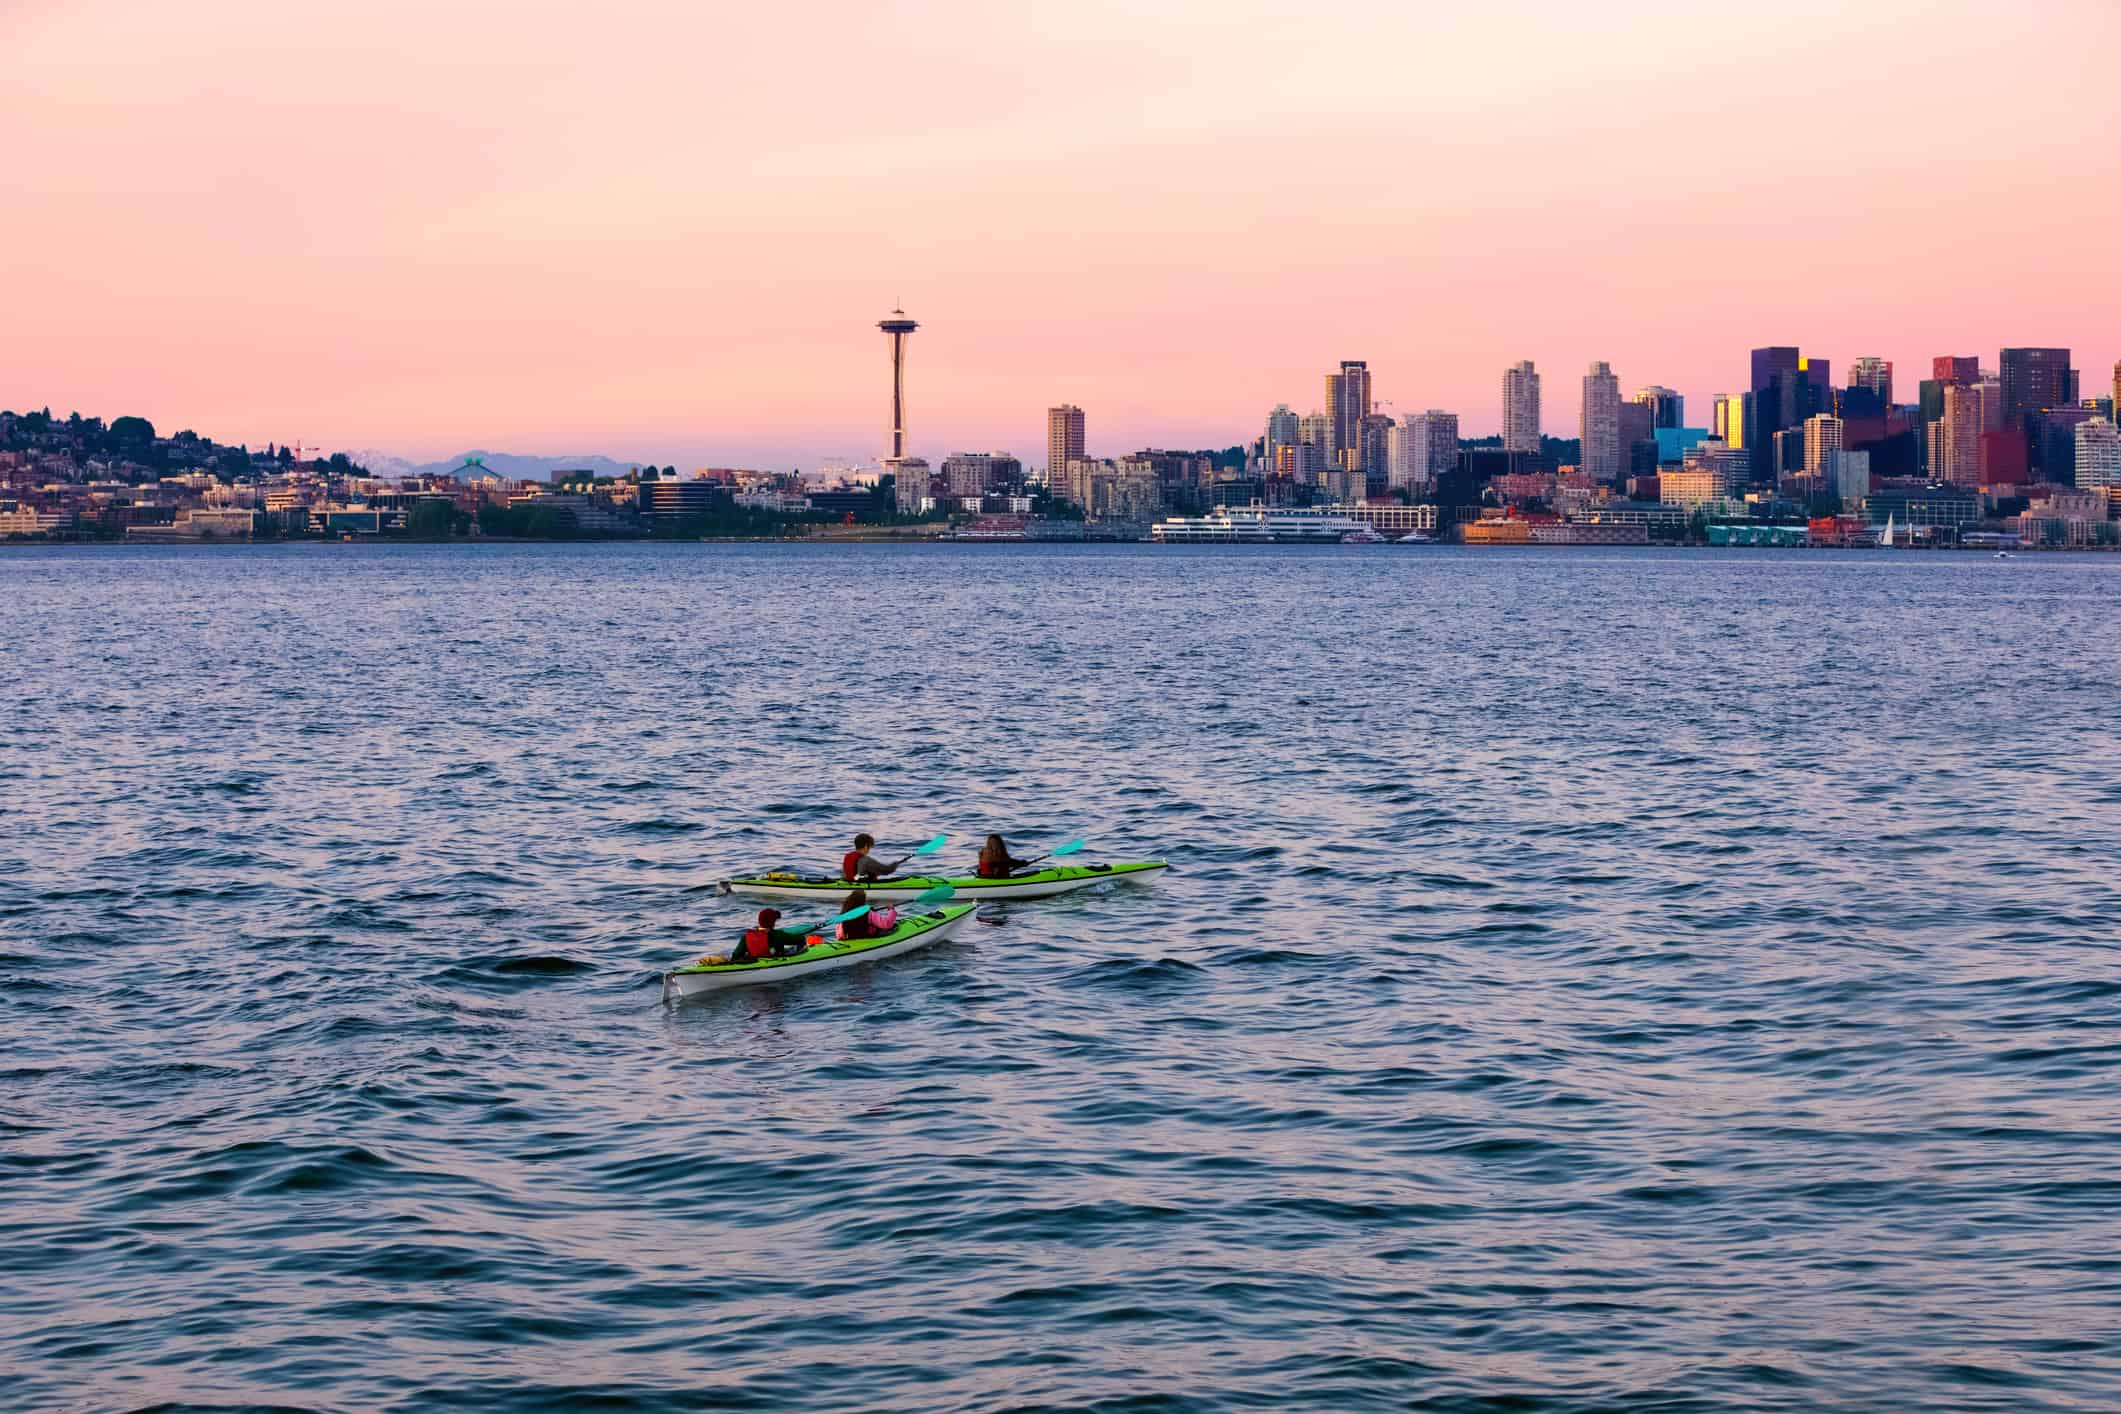 Kayaks in Puget Sound waters with skyline and cityscape of Seattle, WA in background.